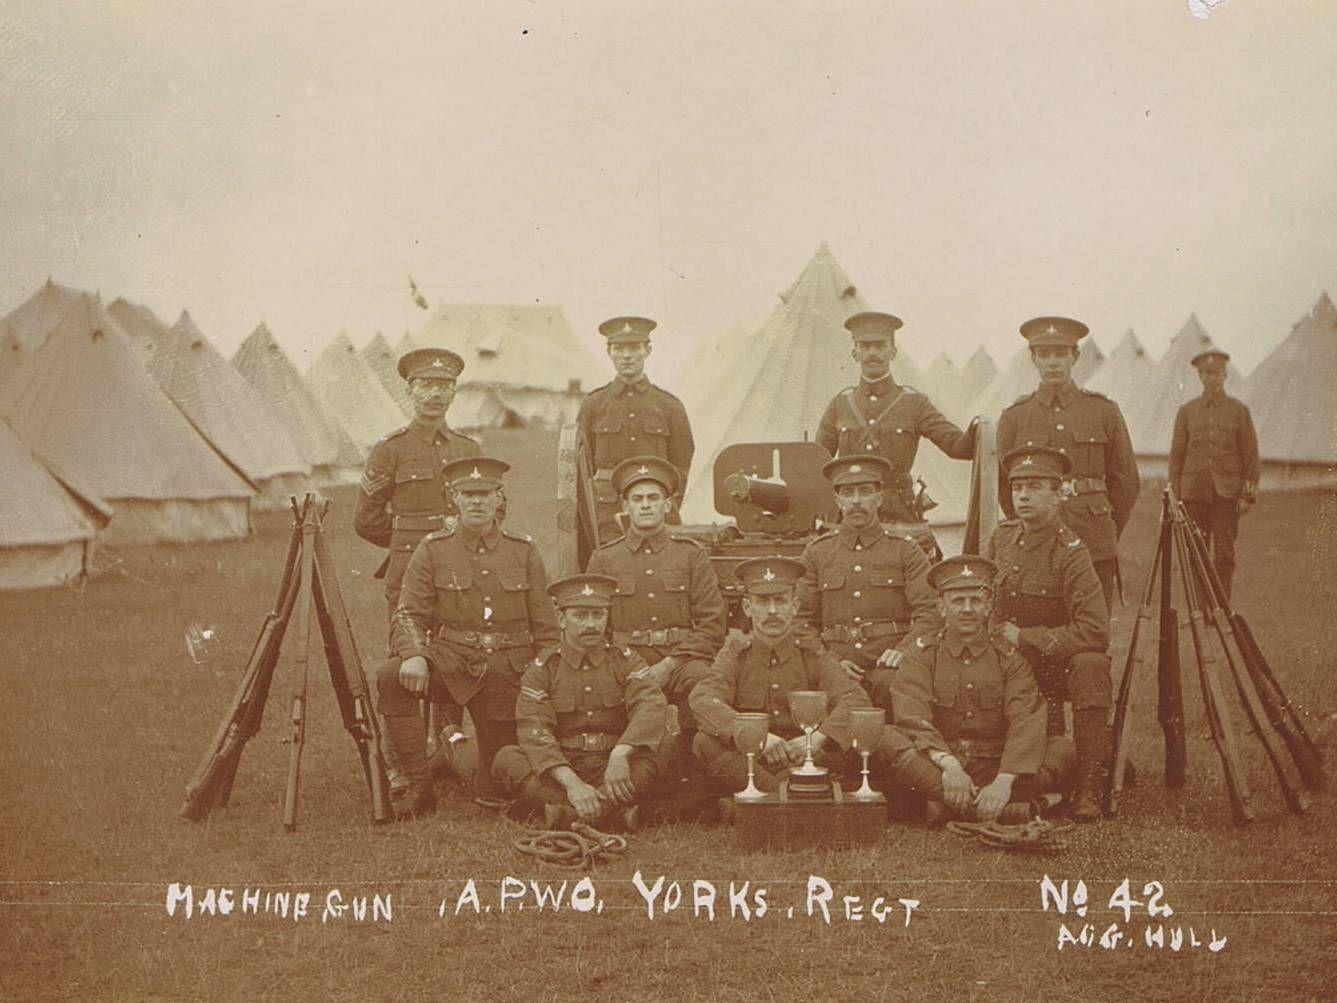 The 5th Territorial Force Battalion, group photo of Machine Gun Co. with trophies, with tents in the background at their annual camp in Bridlington, 4th-8th July 1908